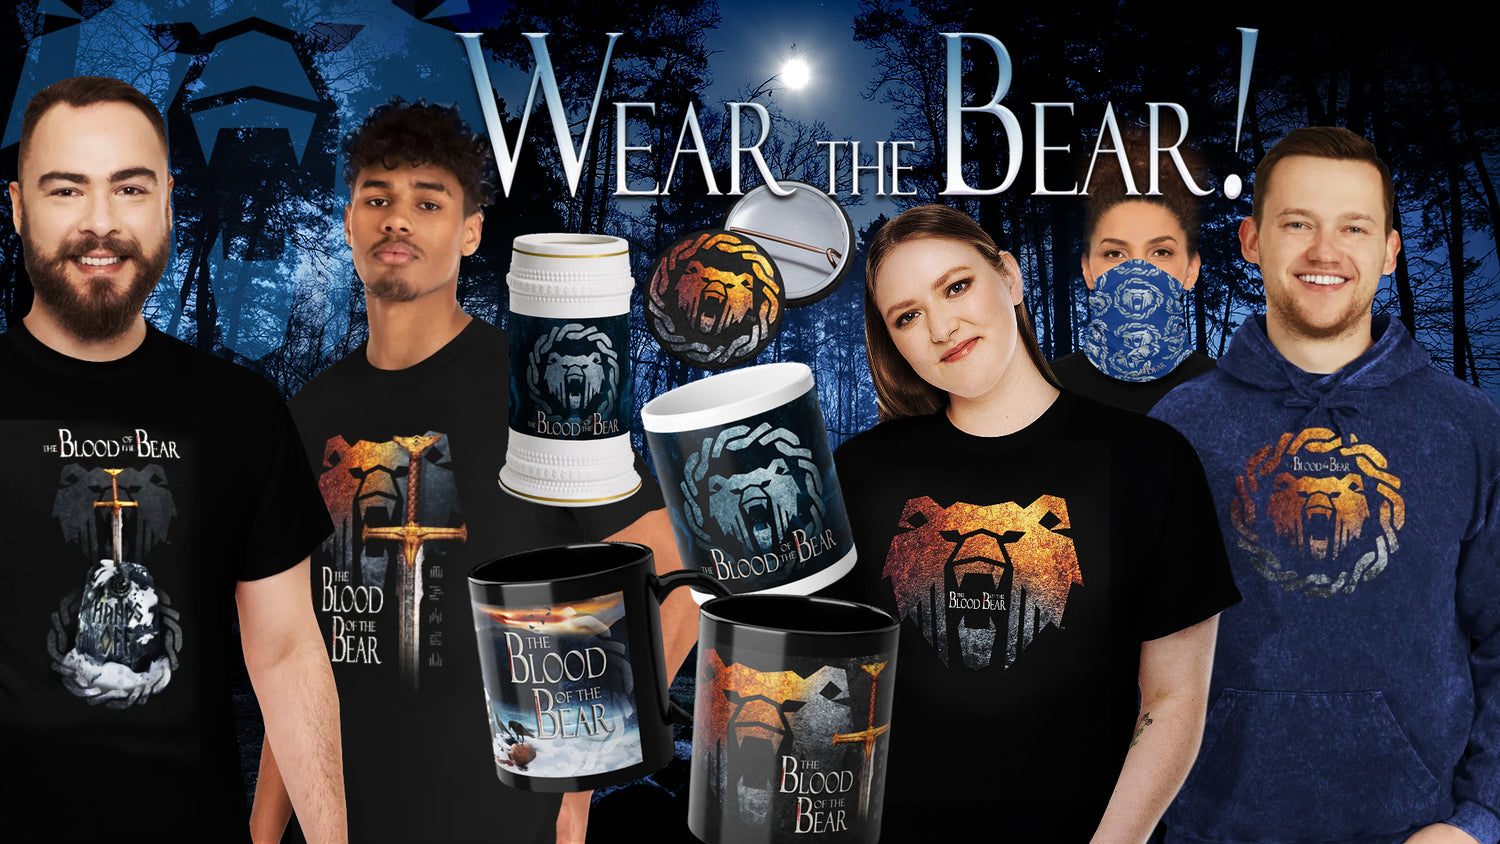 Image of clothing, mugs, and badges featuring The Blood of the Bear designs